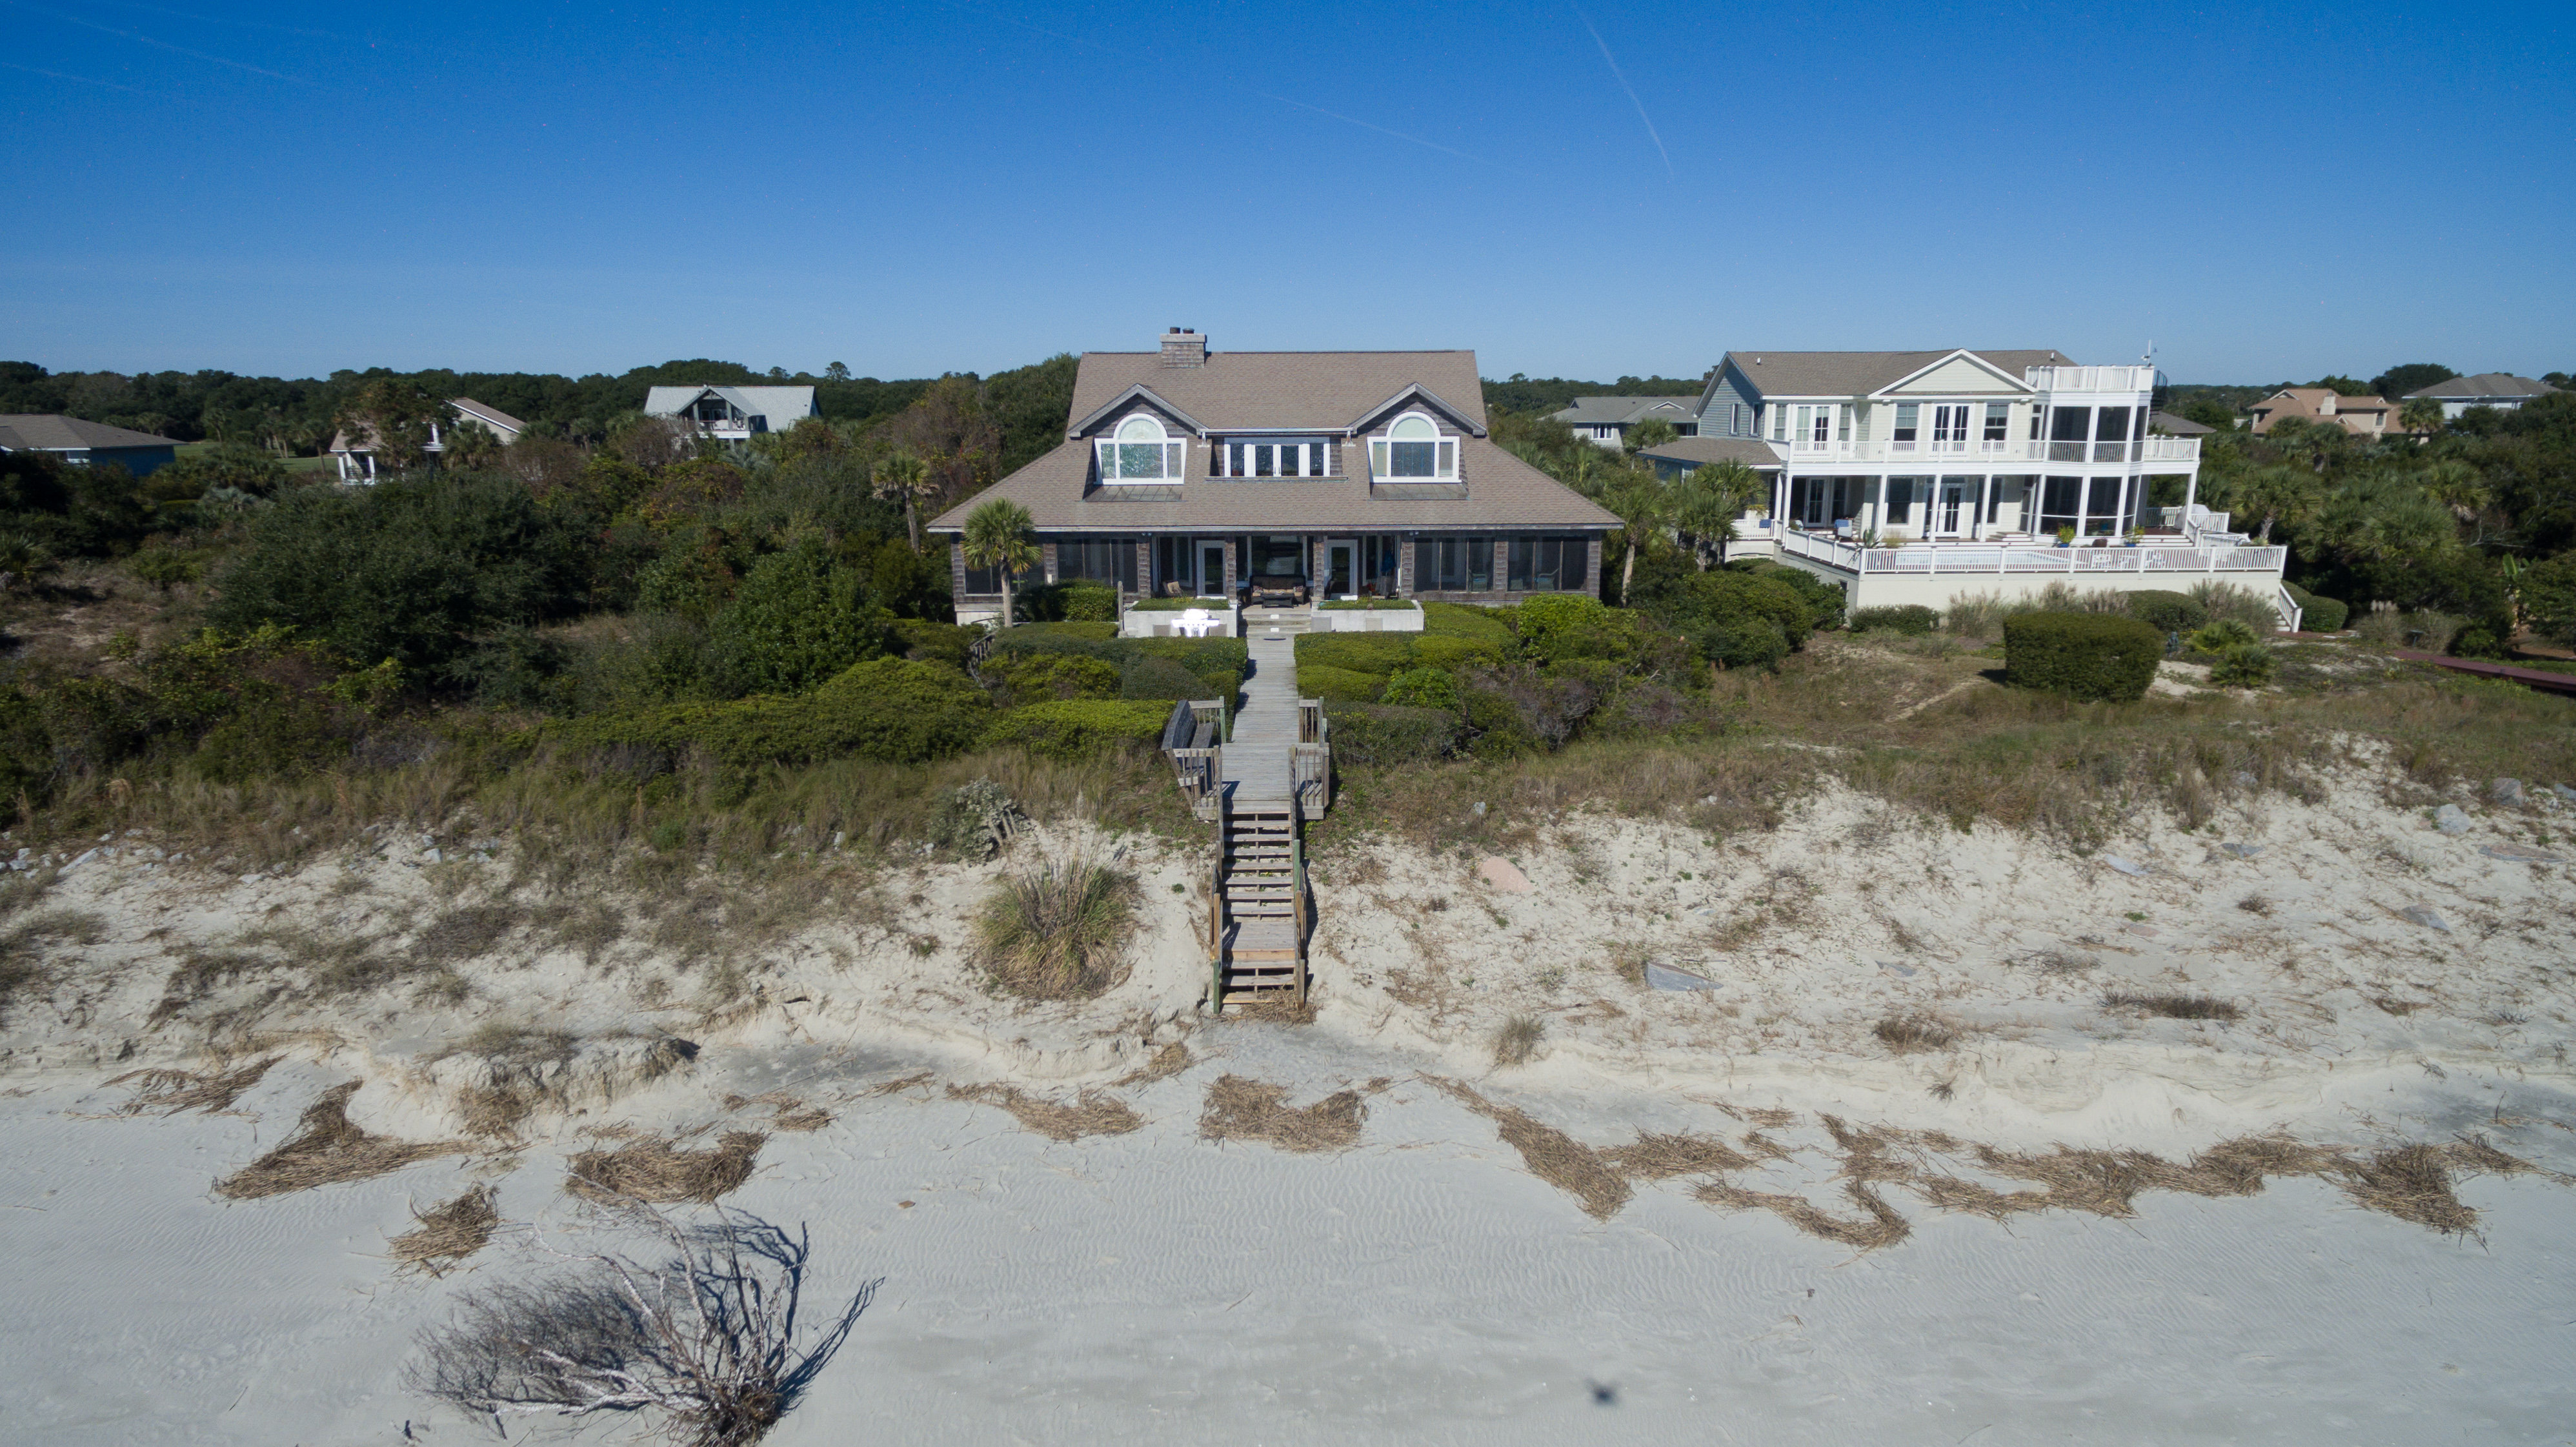 Here is your beach house looking from the ocean!